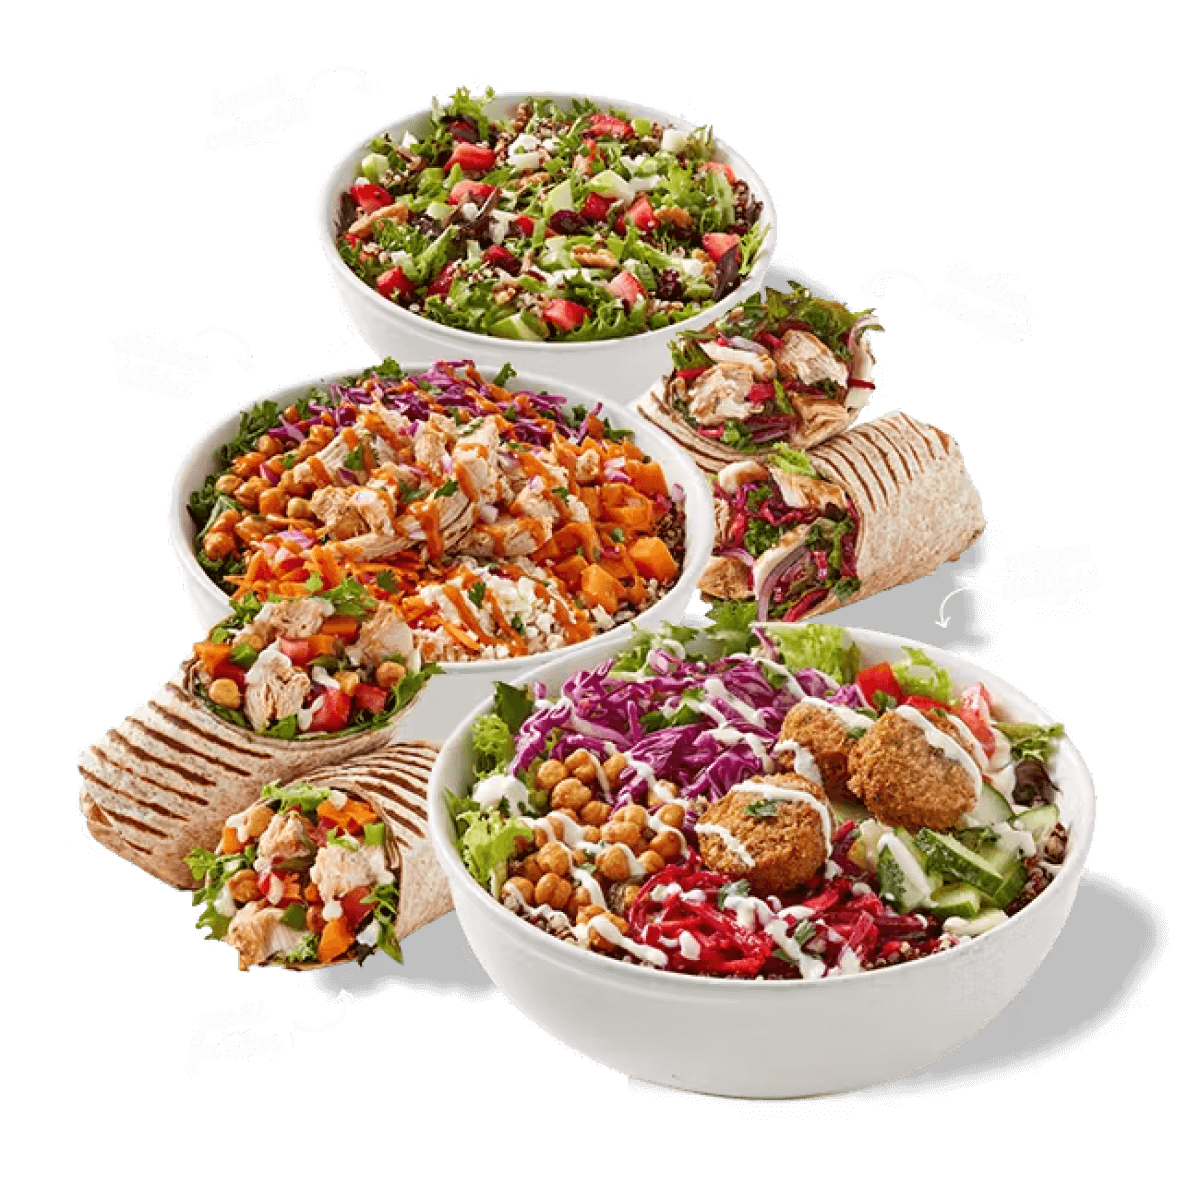 Healthy salad bowls and wraps